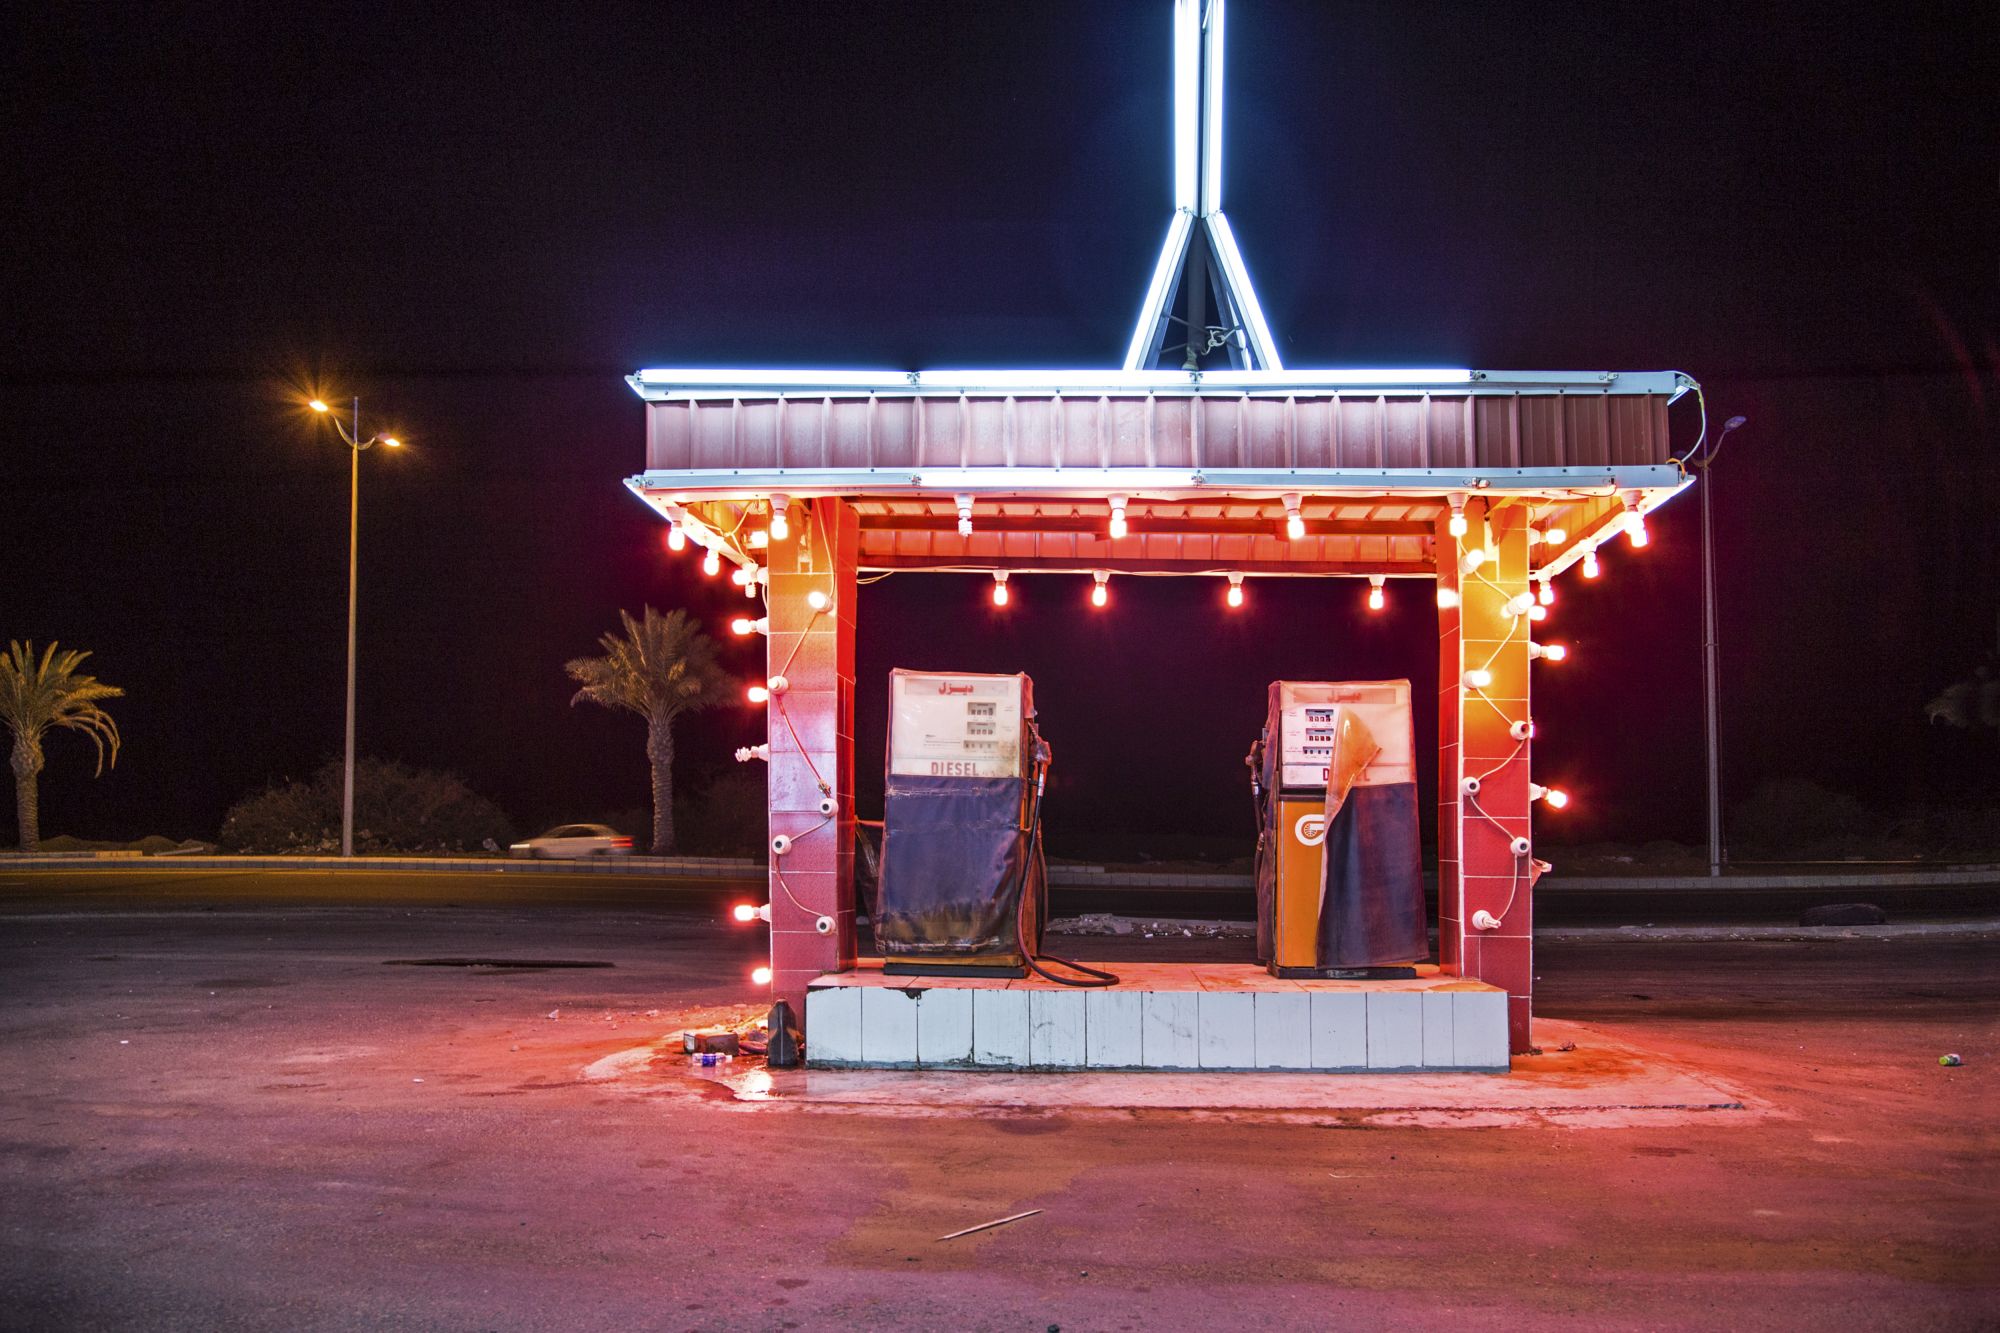  Ahmed Mater (Saudi, born 1979). Gas Station Leadlight, 2013. C-print, 60 x 90 in. (152.4 x 228.6 cm). Courtesy of the artist and GALLERIA CONTINUA, San Gimignano / Beijing / Les Moulins / Habana. © Ahmed Mater 